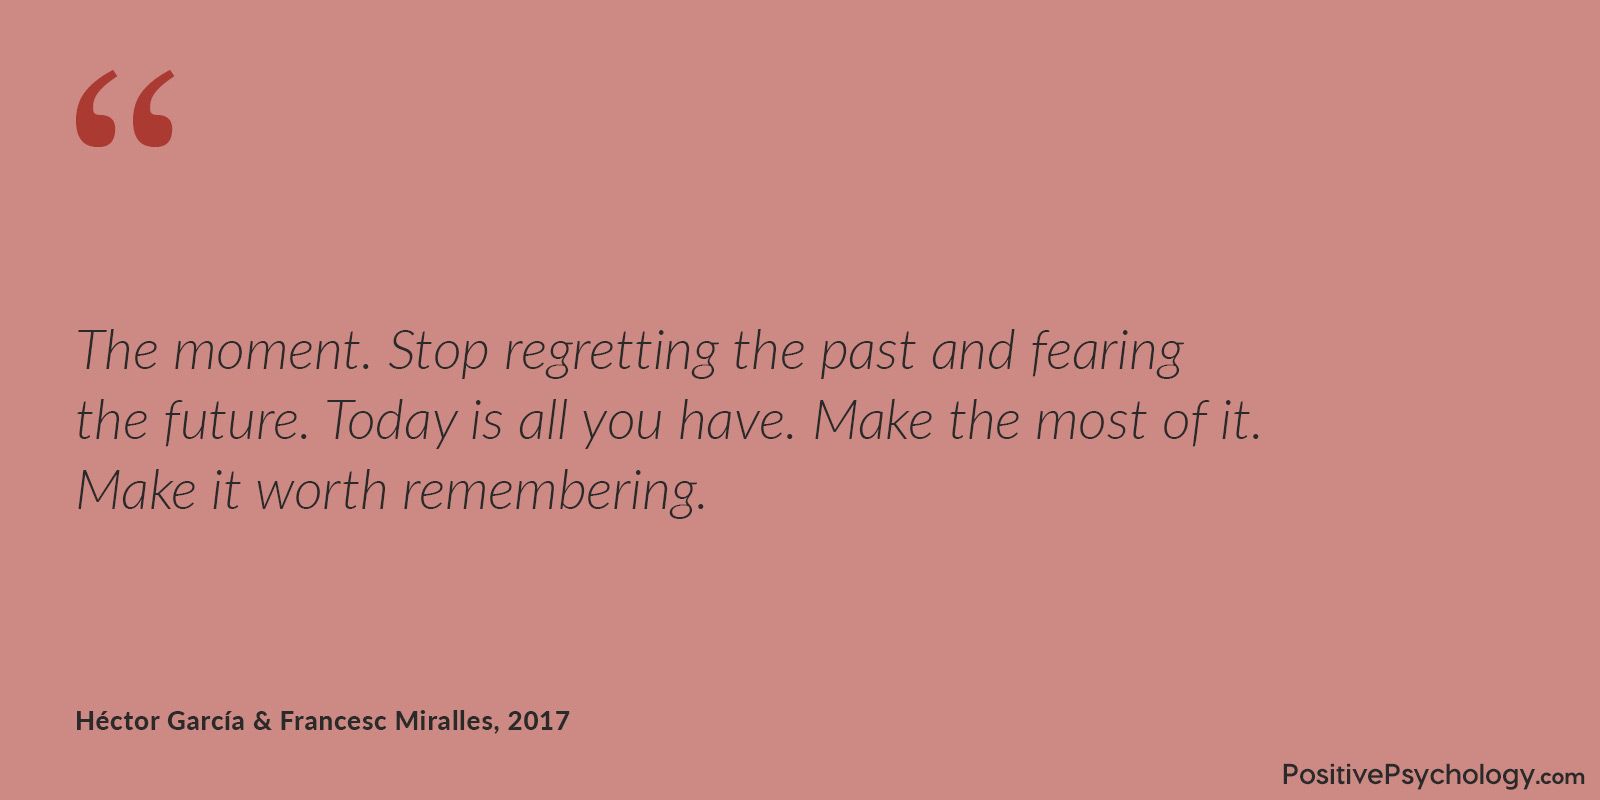 Stop regretting the past